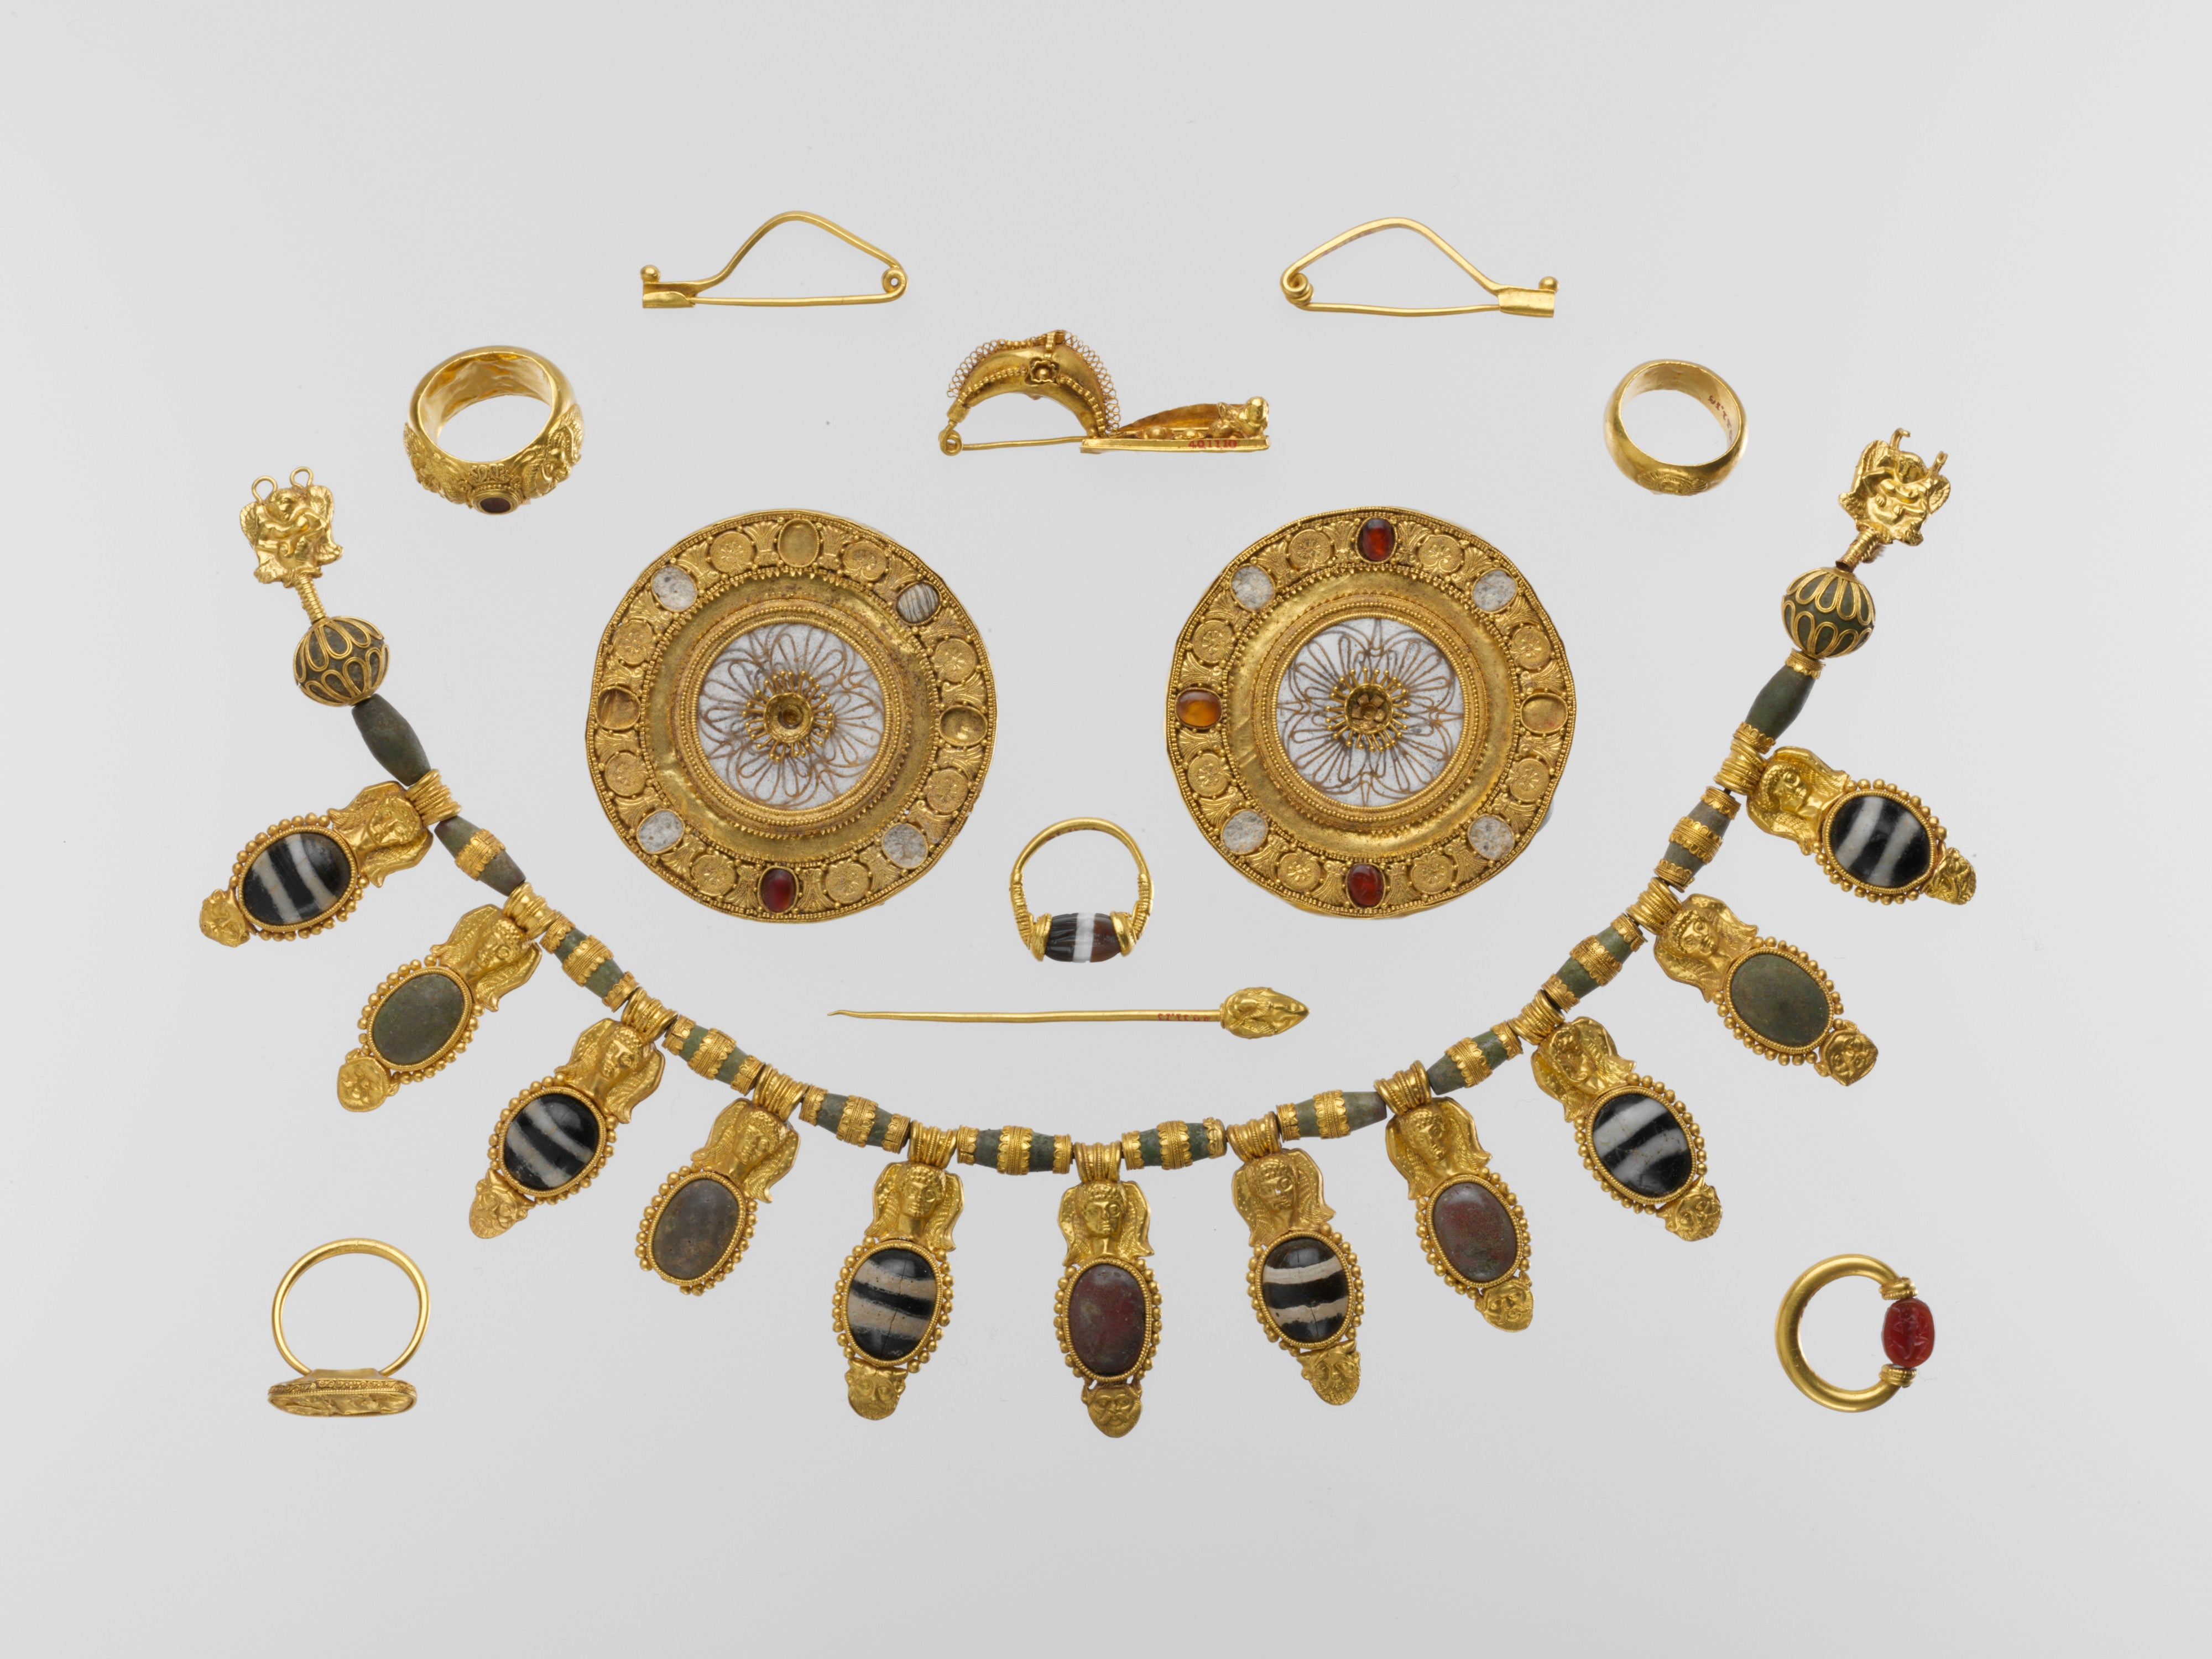 The Indian Jewellery collection at the Victoria & Albert Museum